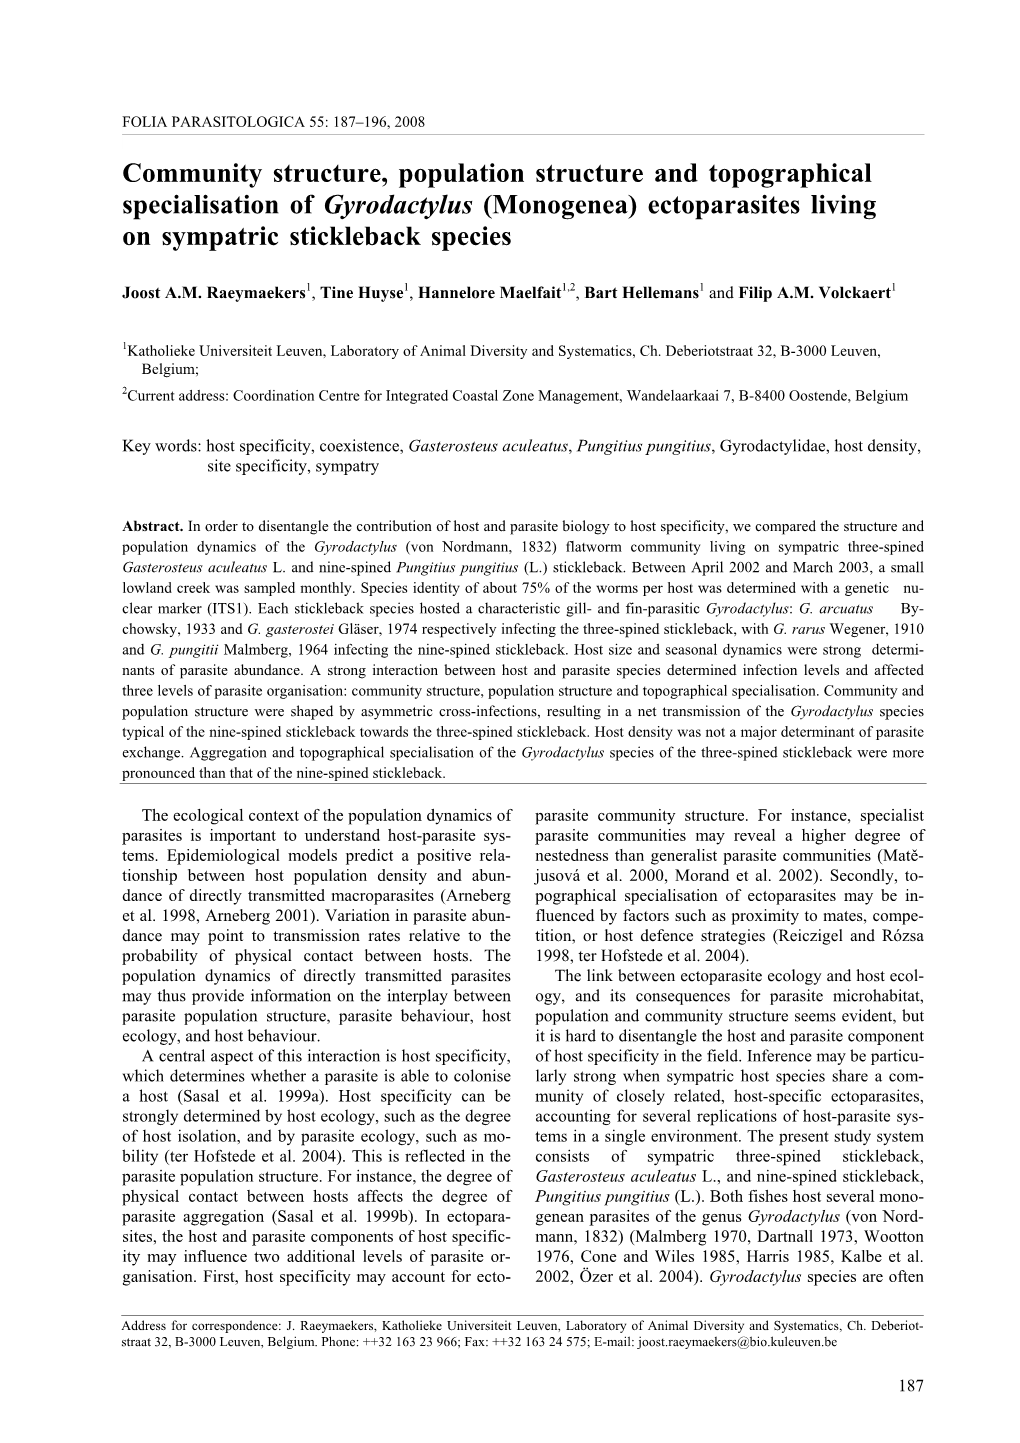 Community Structure, Population Structure and Topographical Specialisation of Gyrodactylus (Monogenea) Ectoparasites Living on Sympatric Stickleback Species